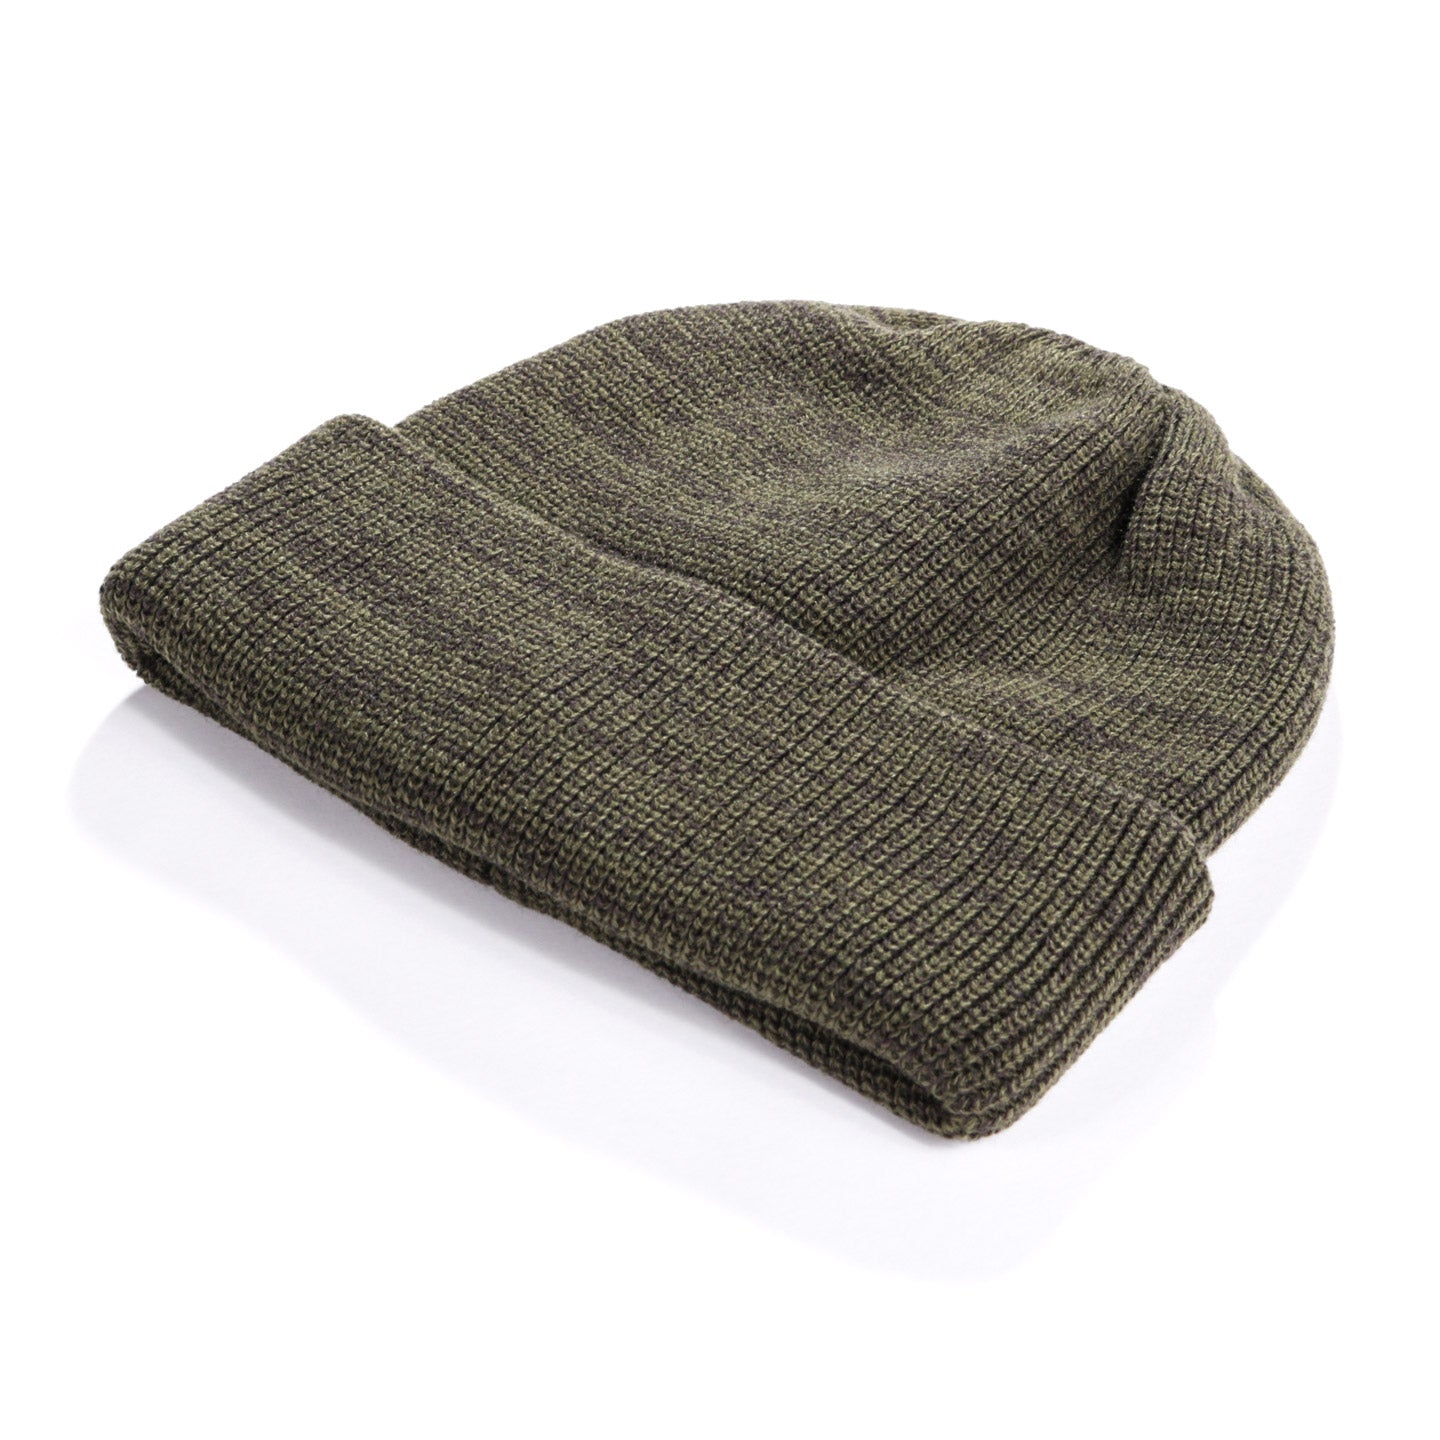 ROTOTO WATCHCAP OLIVE / CHARCOAL